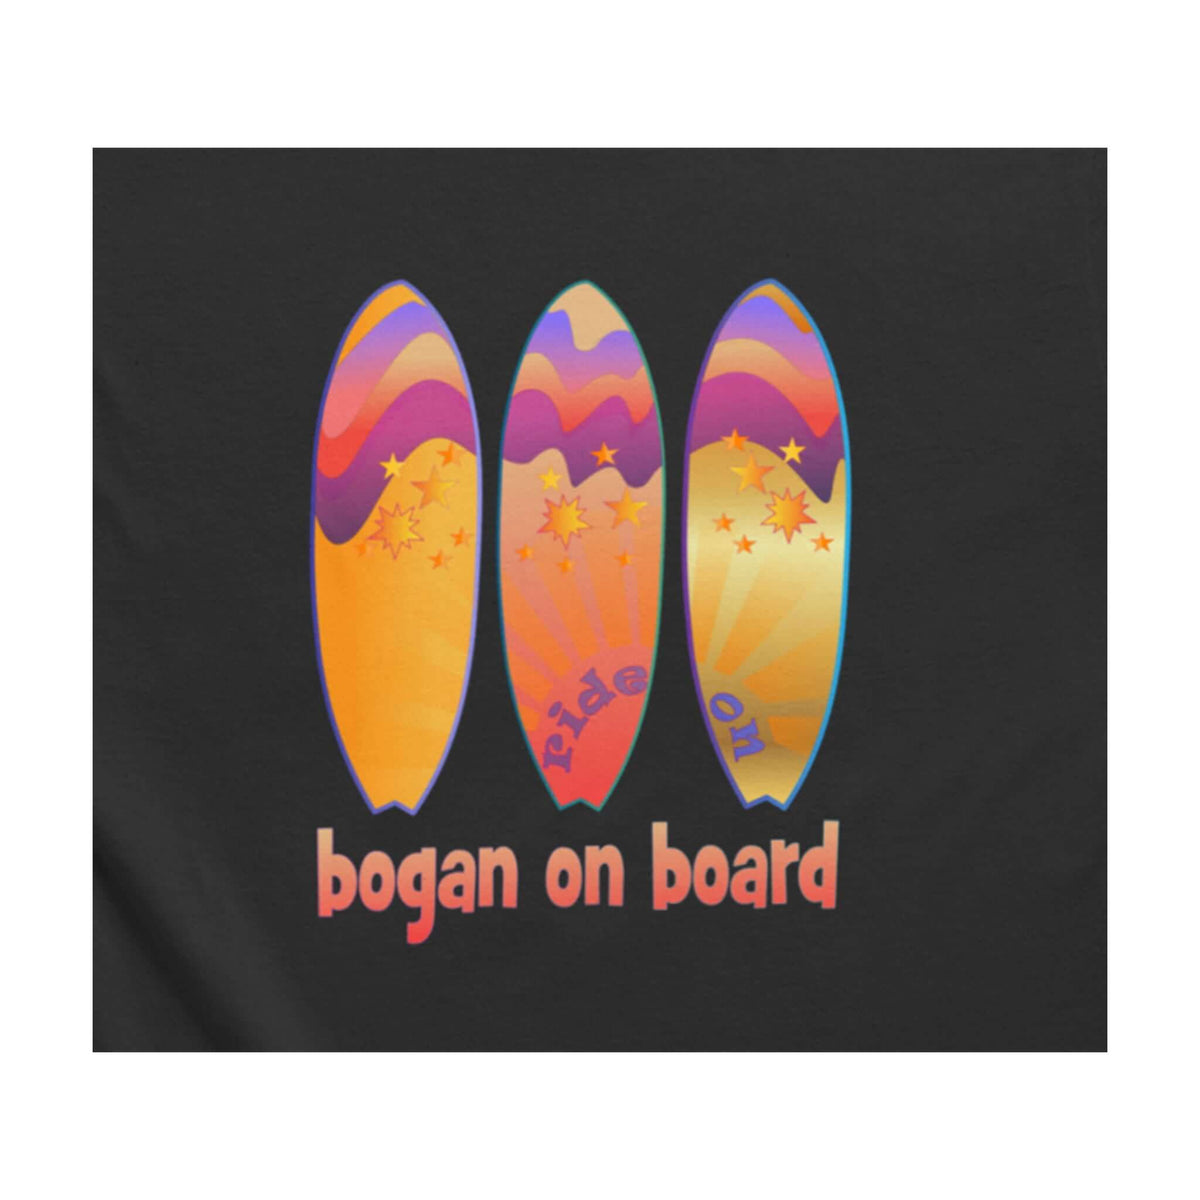 Brightly coloured Bogan on Board graphic surfboard design featuring three surfboards